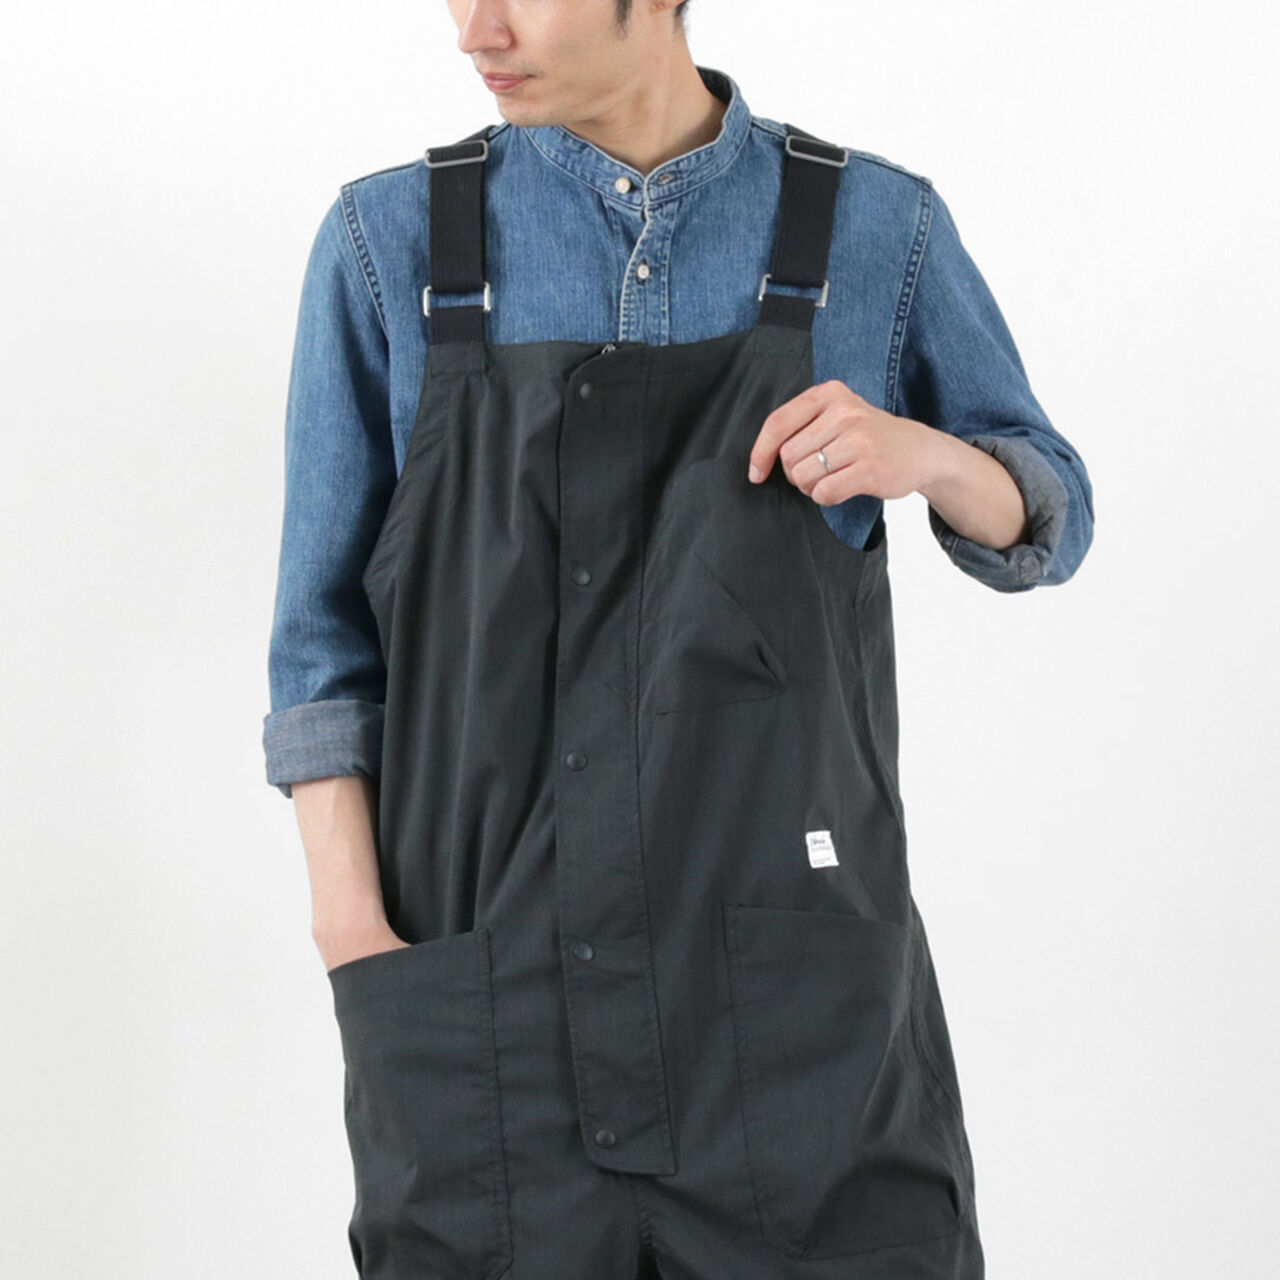 HINOC RIPSTOP FIELD OVERALLS,Black, large image number 0